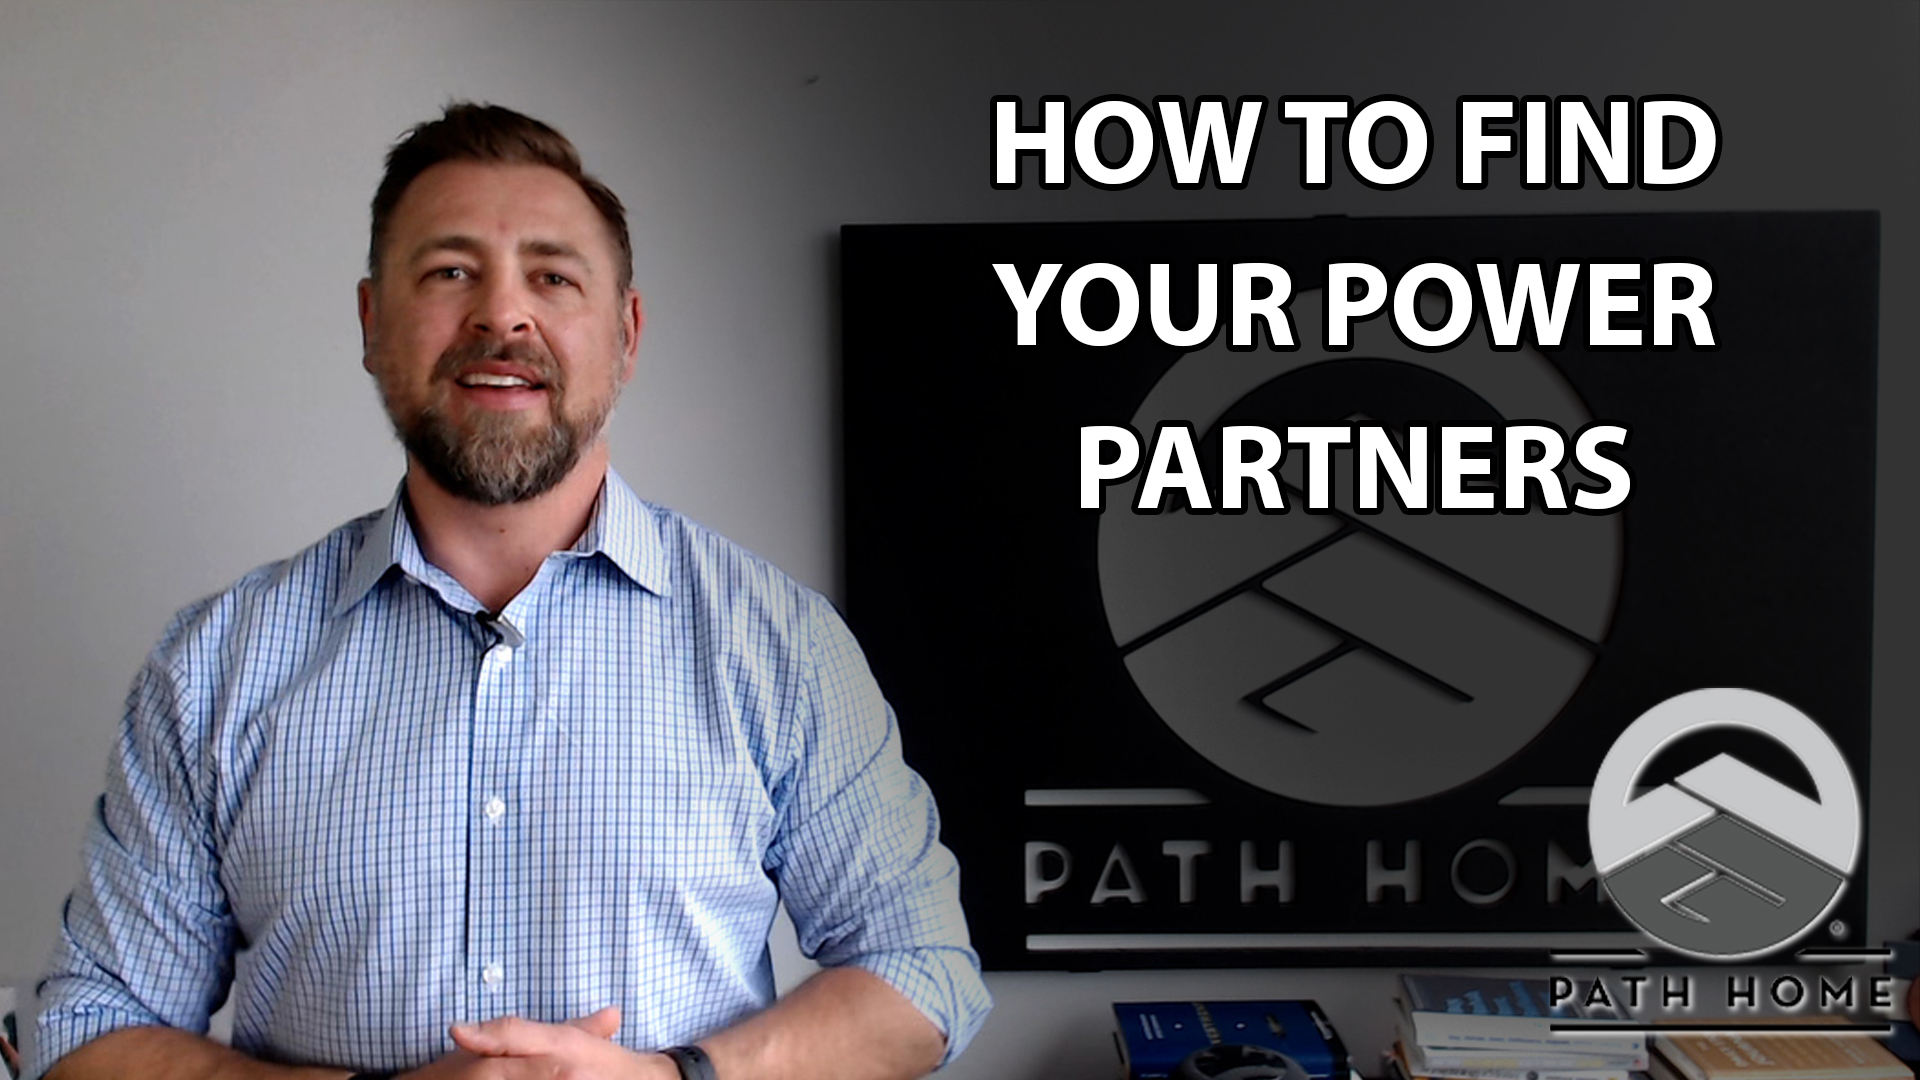 What You Should Look for in a Partner